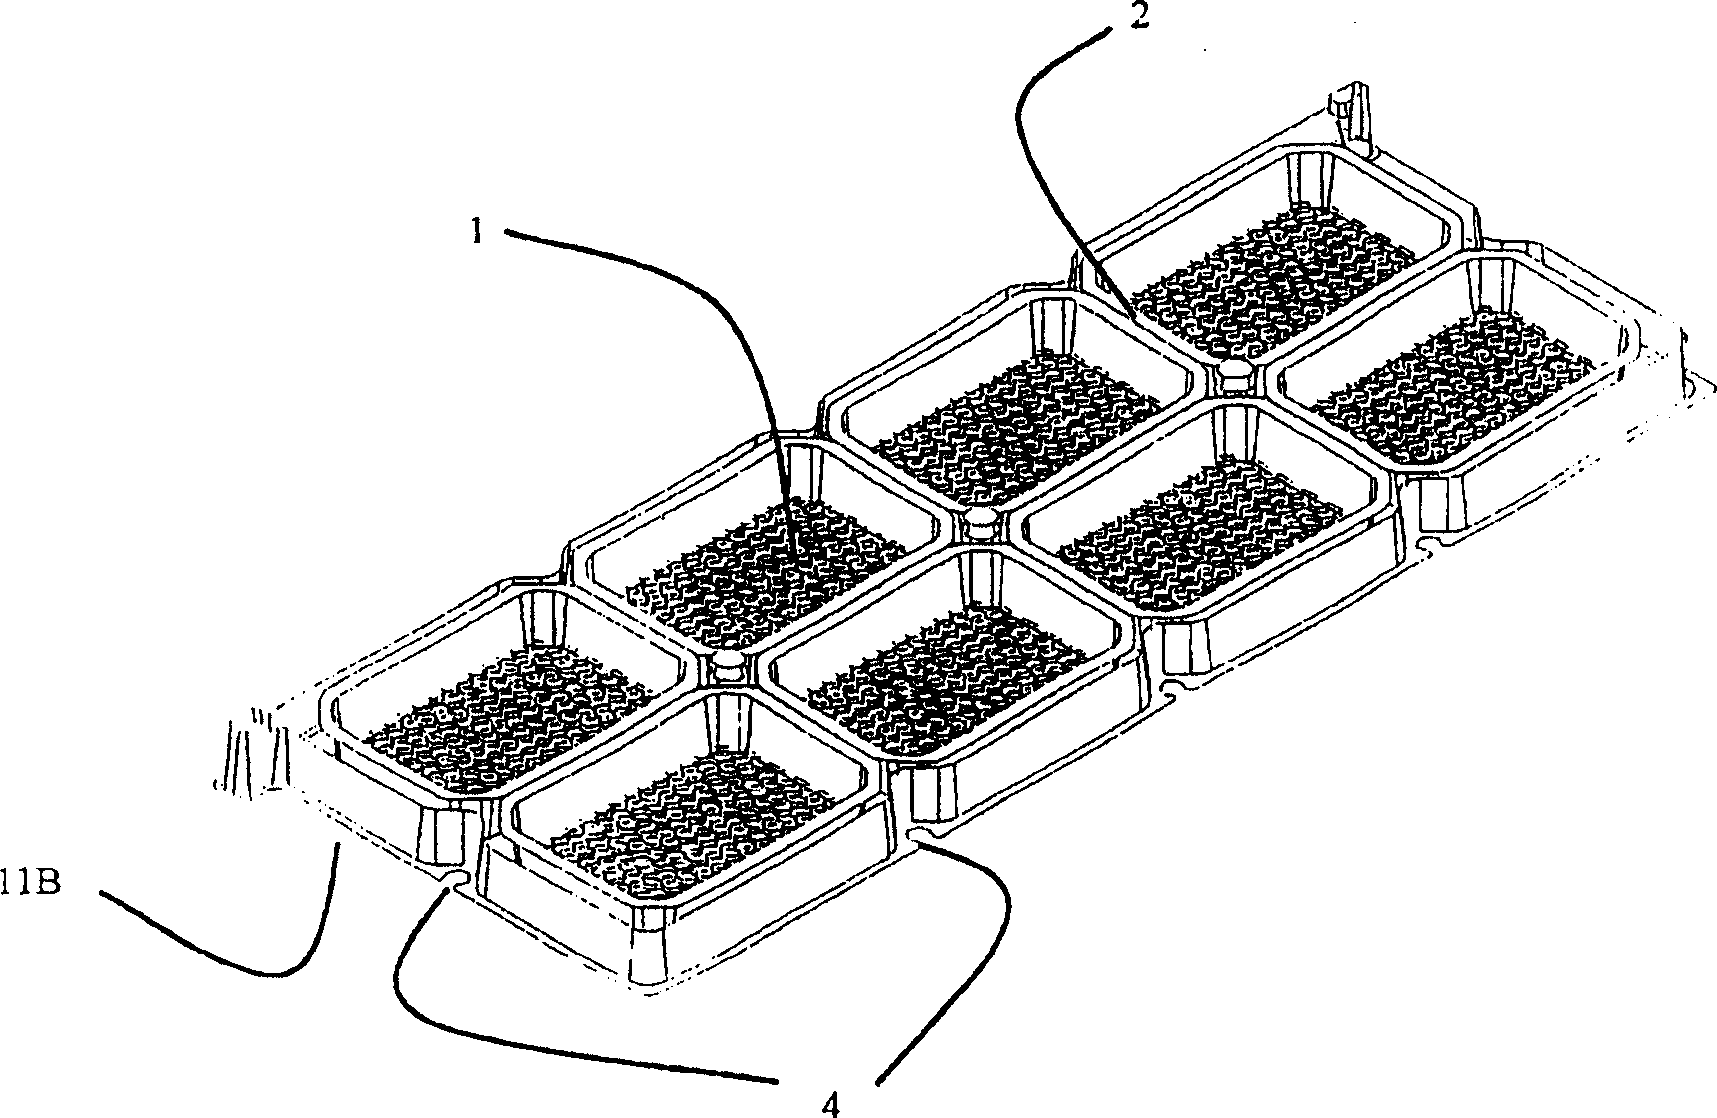 Device for the production of comb honey